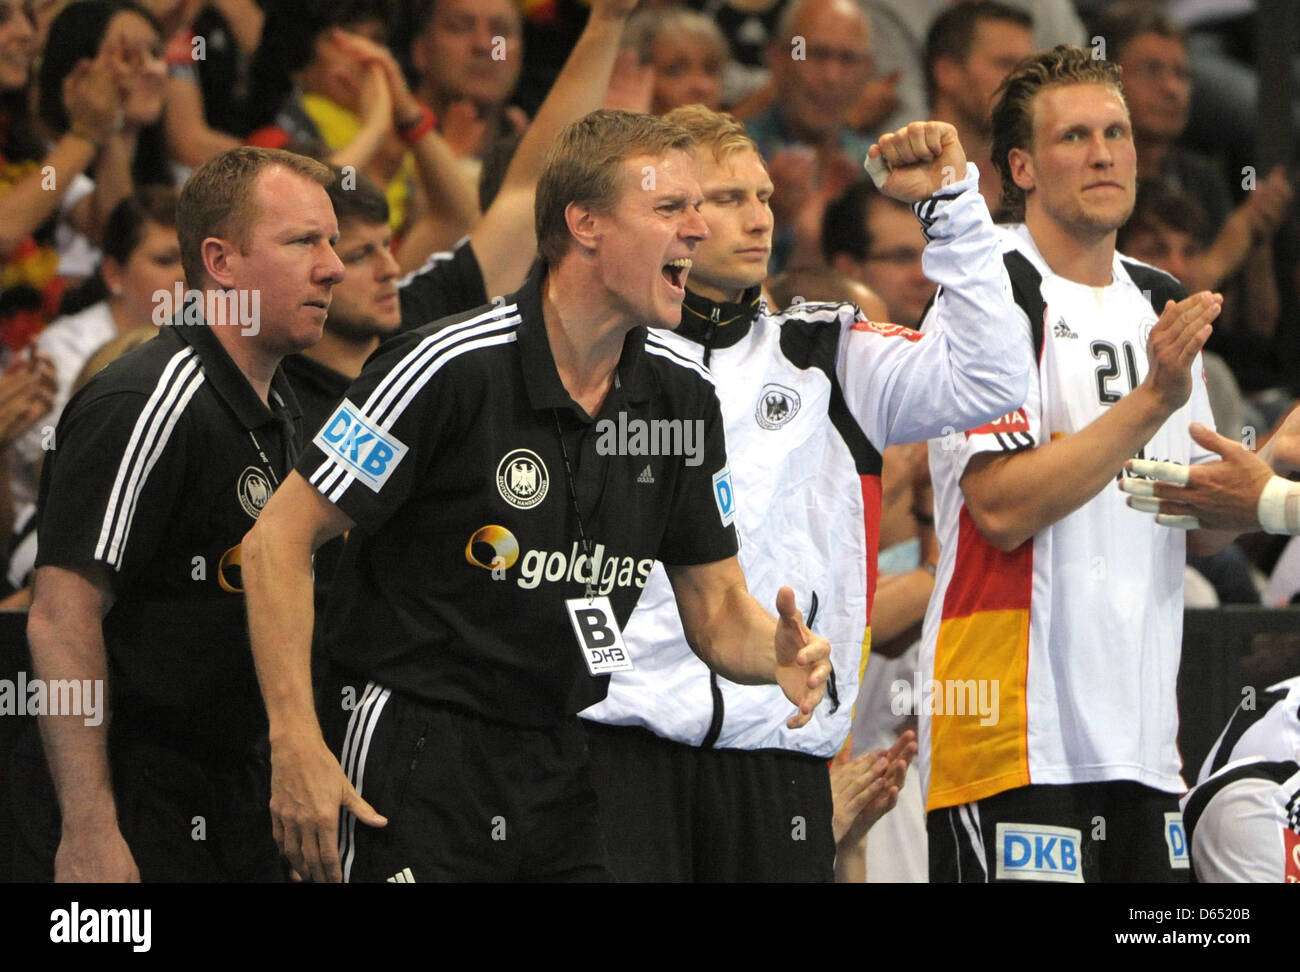 Germany's assistant coach Frank Carstens (L-R), national coach Martin Heuberger and players Steffen Weinhold and Lars Kaufmann celebrate a goal during the handball world championship qualification match between Germany and Bosnia and Herzegovina at Porsche Arena in Stuttgart, Germany, 09 June 2012. Germany won the match 36-24. Photo: MARIJAN MURAT Stock Photo